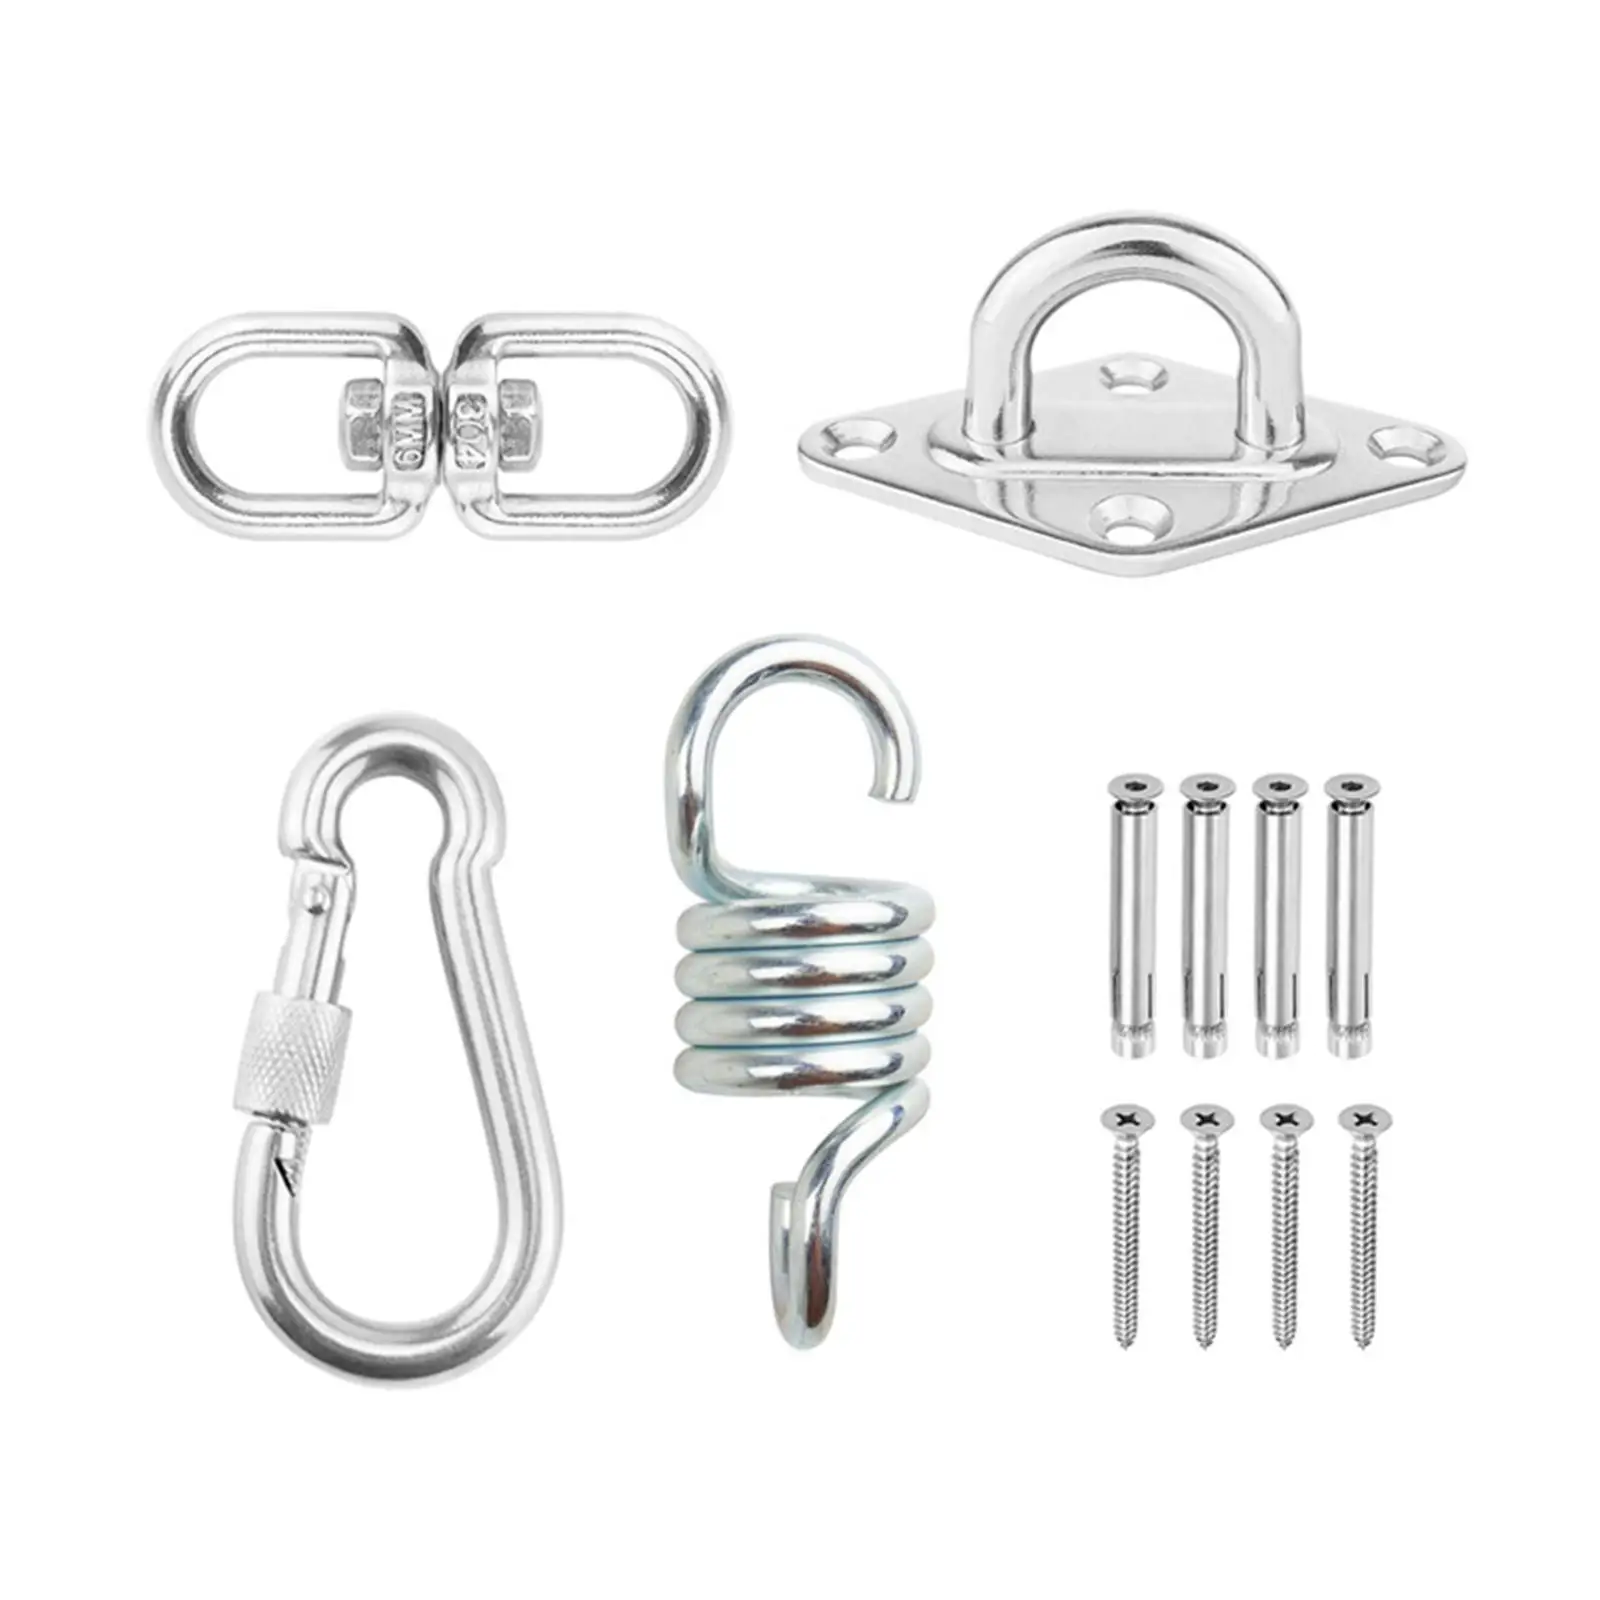 Hammock Chair Hanging Kit Stainless Steel Heavy Duty Good Weight Bearing 500lbs Sturdy Carabiner and Screws Ceiling Hook Hanger